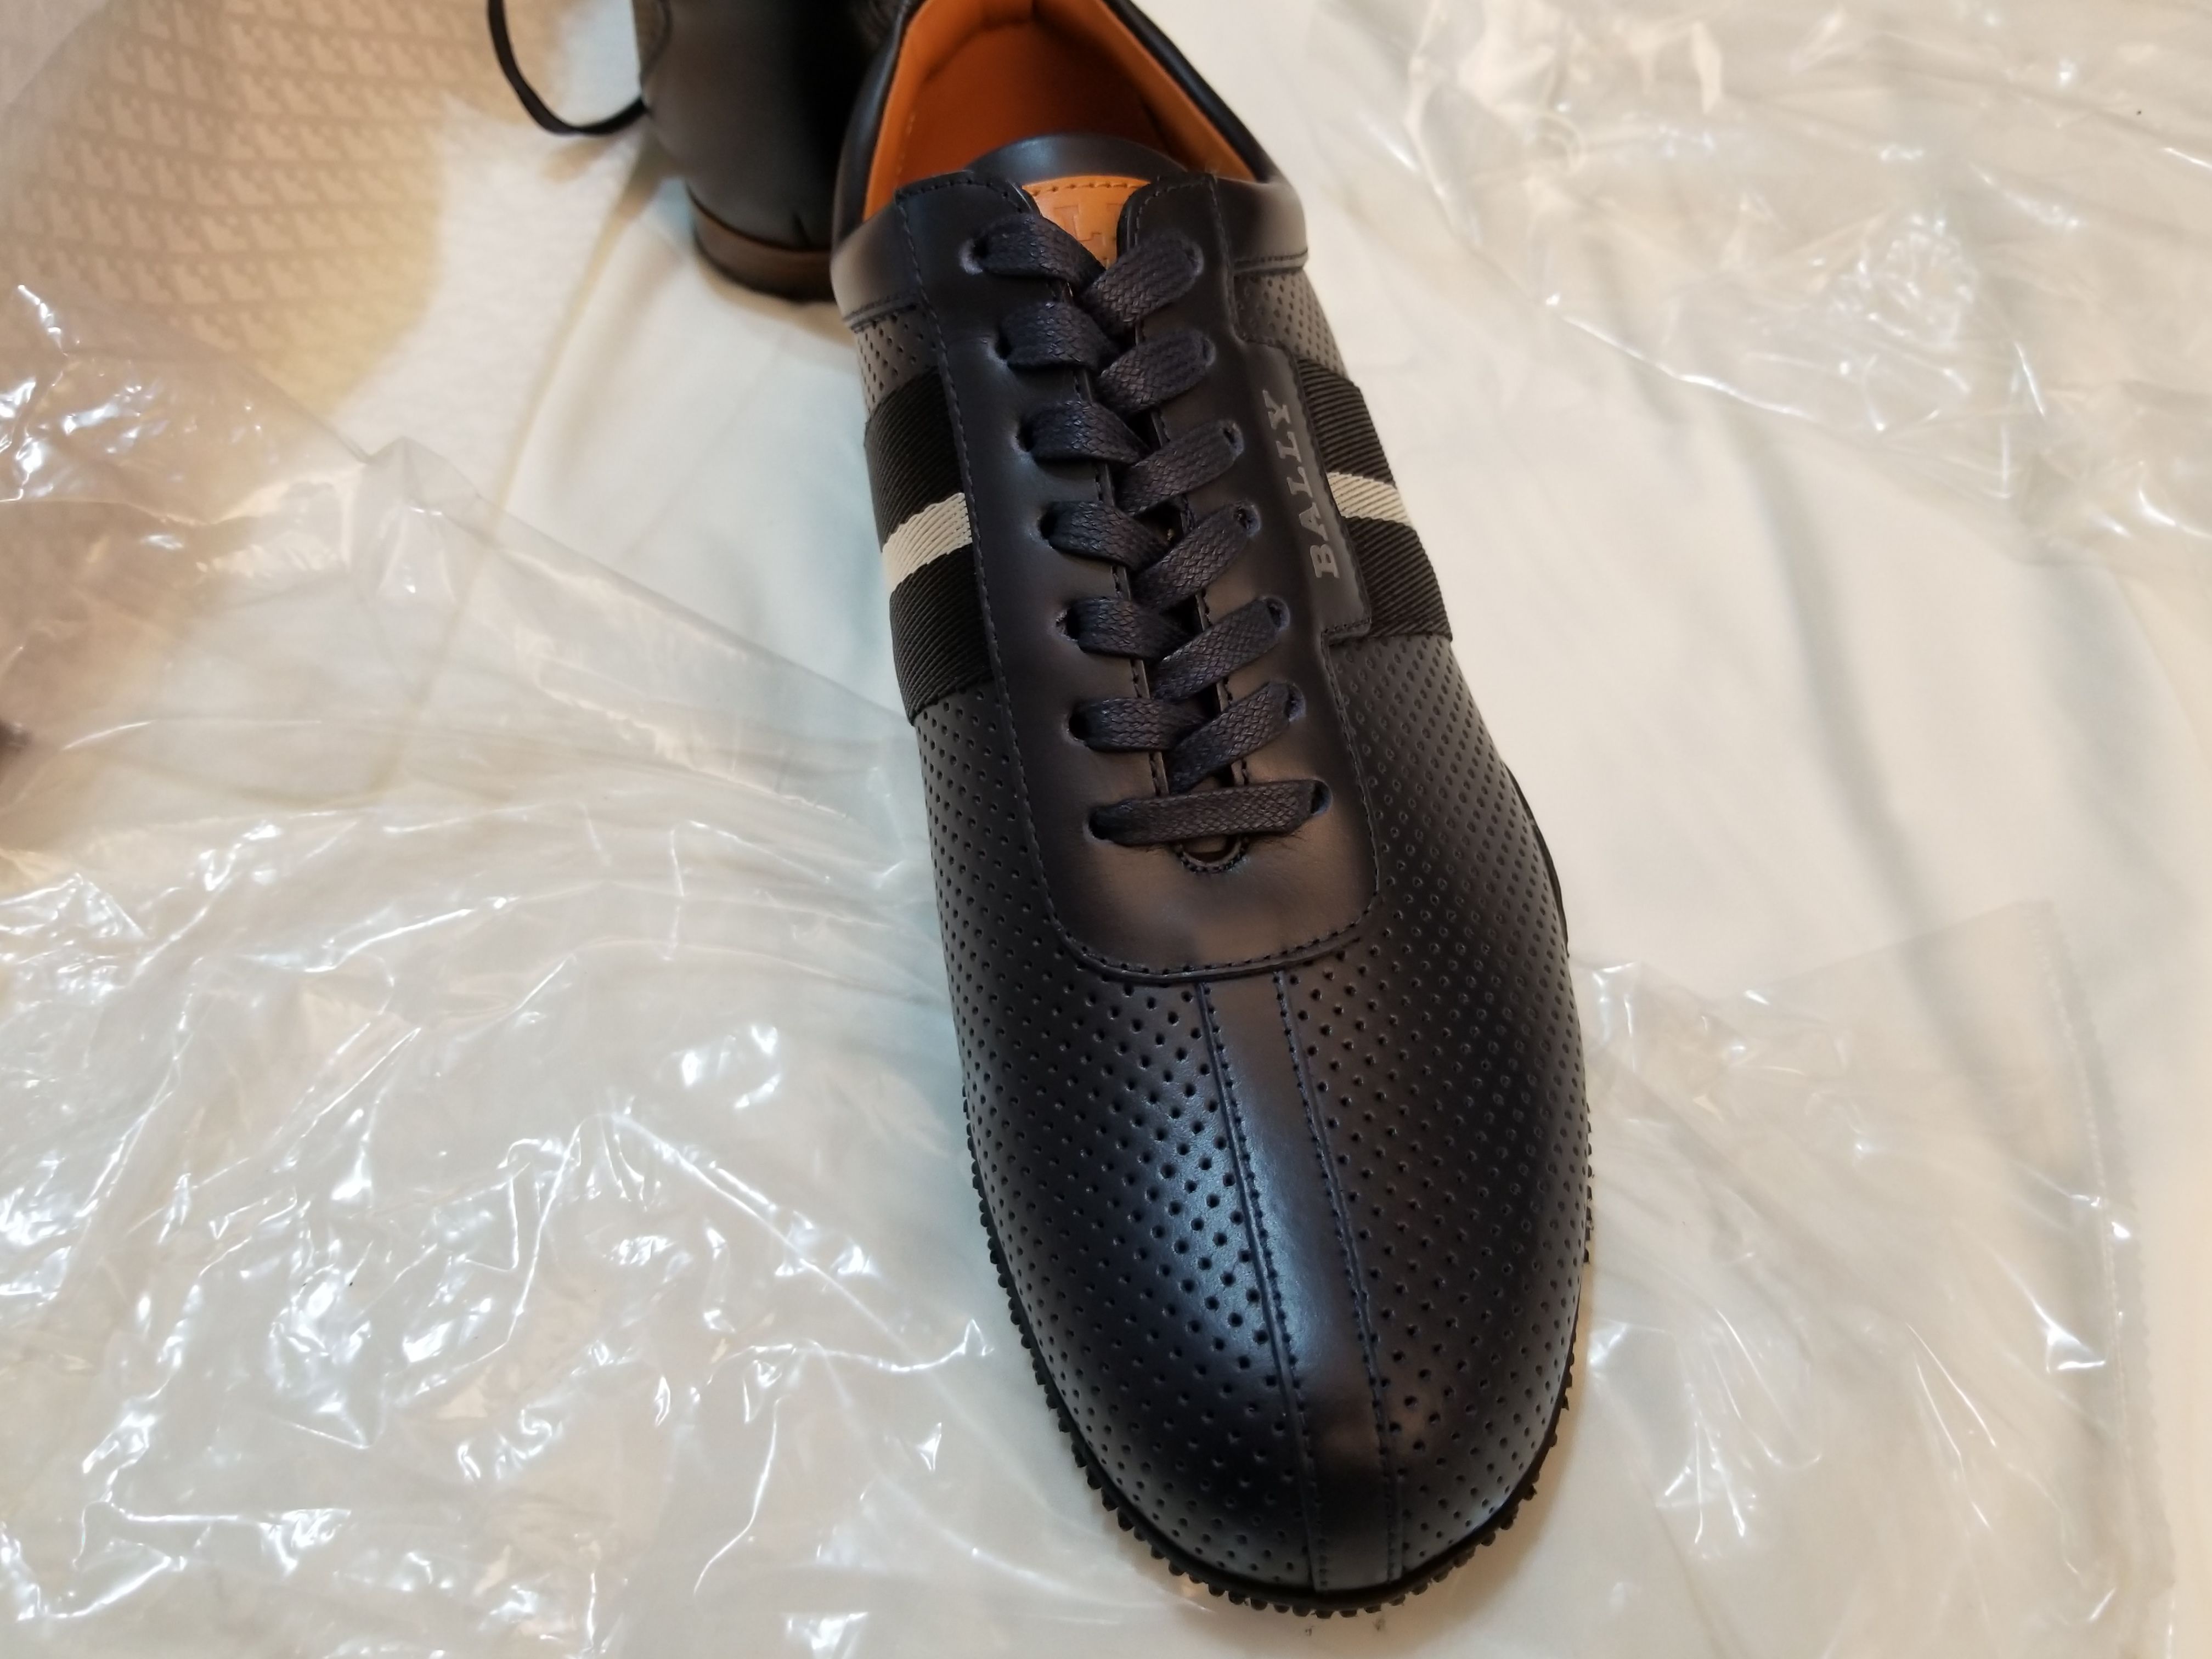 Bally Frenz Perforated Sneakers. Brand with box and size 9.5 for Sale in Lithia Springs, GA - OfferUp